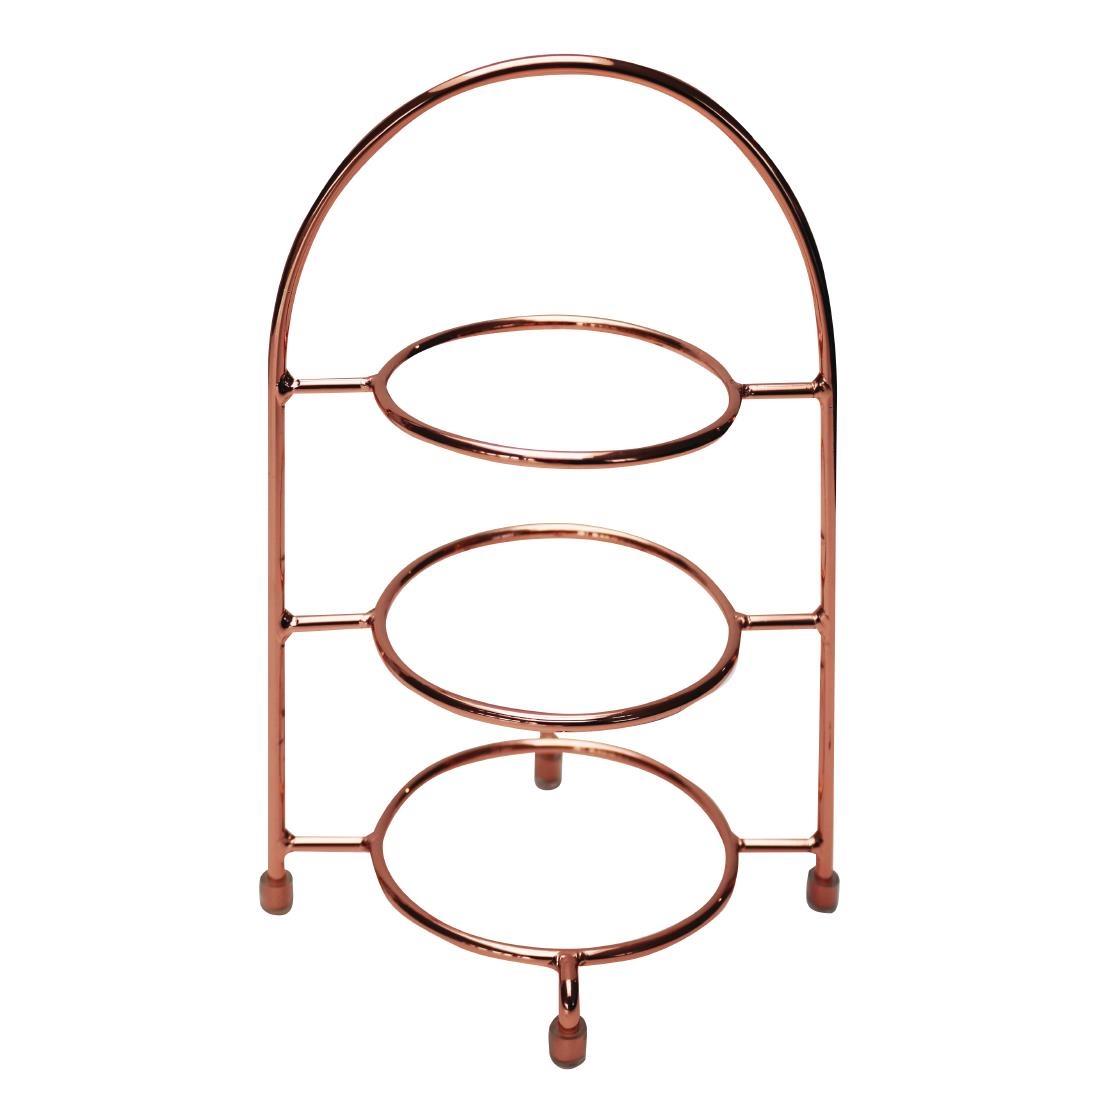 APS Copper Plate Stand for 3x 170mm Plates - DE896  - 1